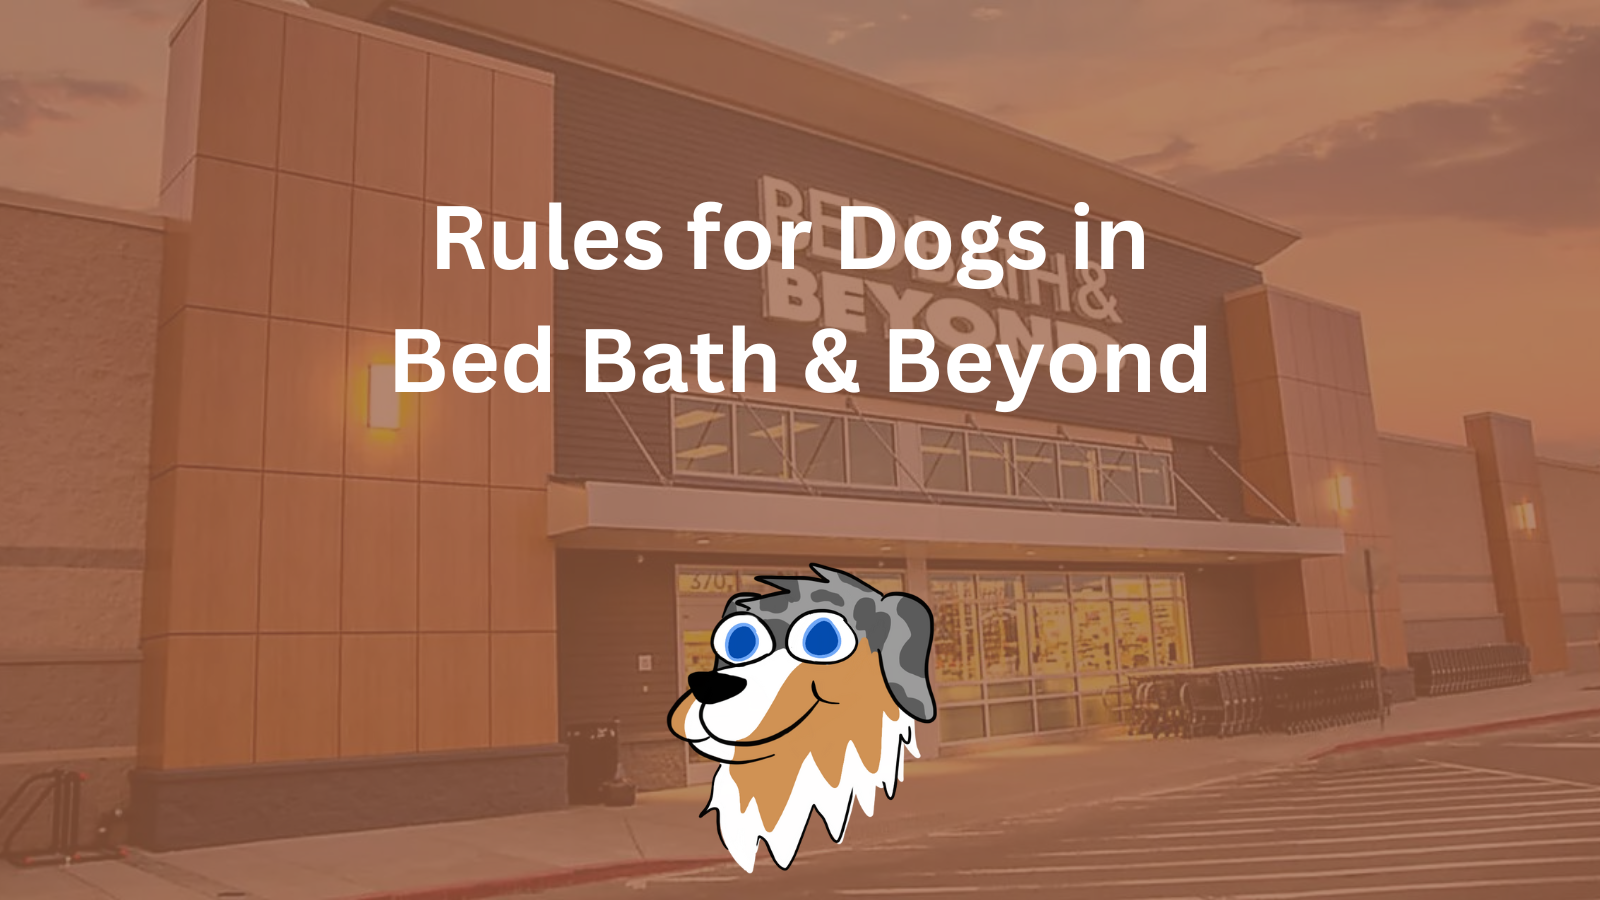 Image Text: "Rules for Dogs in Bed Bath & Beyond"